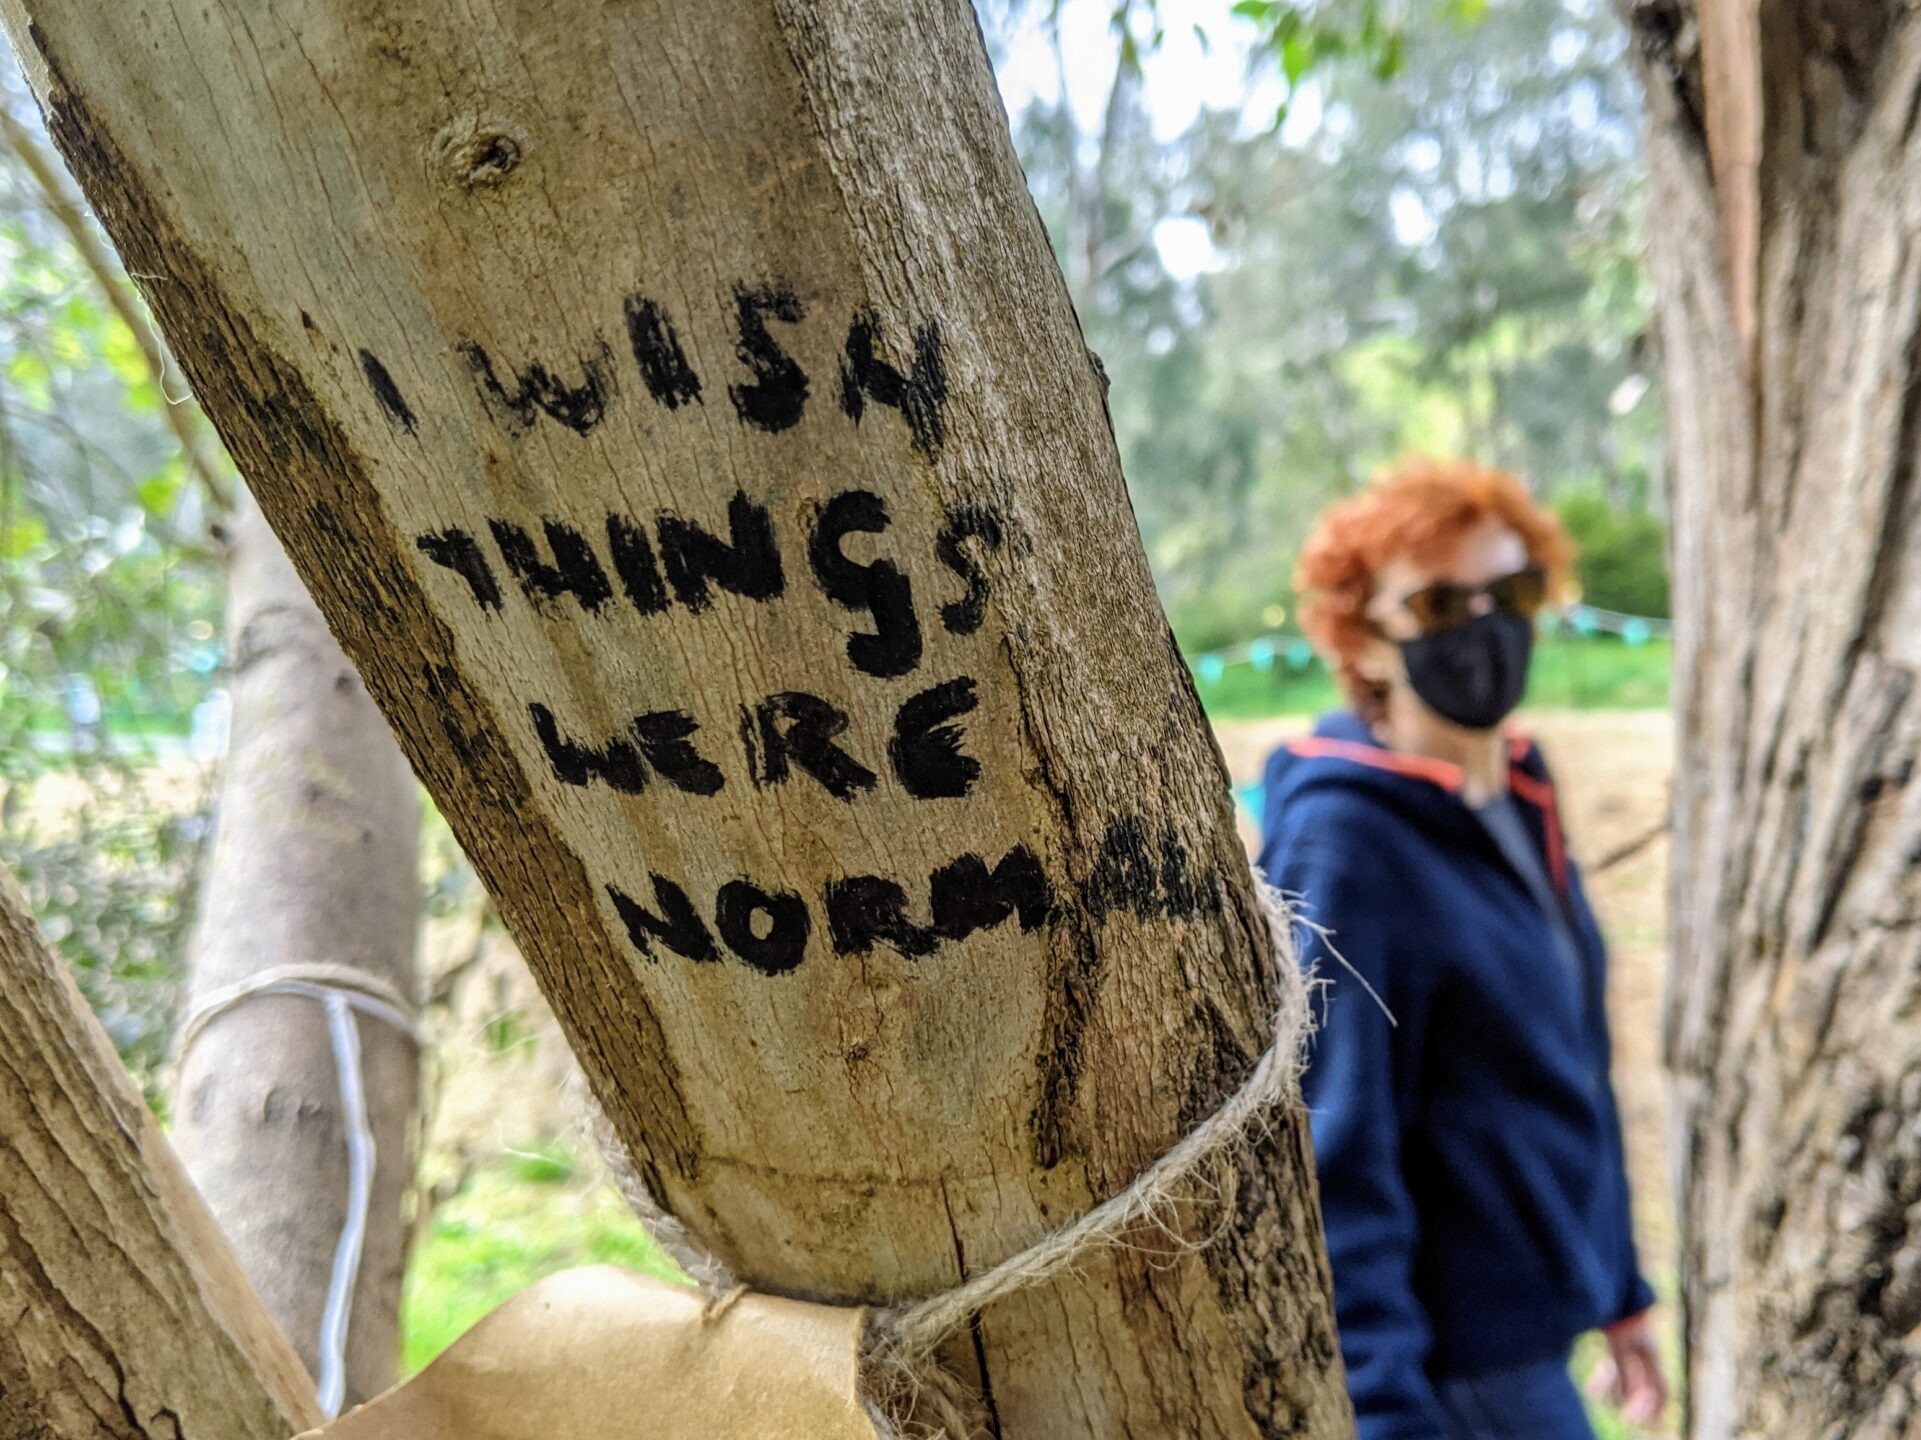 Writing on tree trunk reads 'wish things were normal'. A person wearing a face mask in the background. 